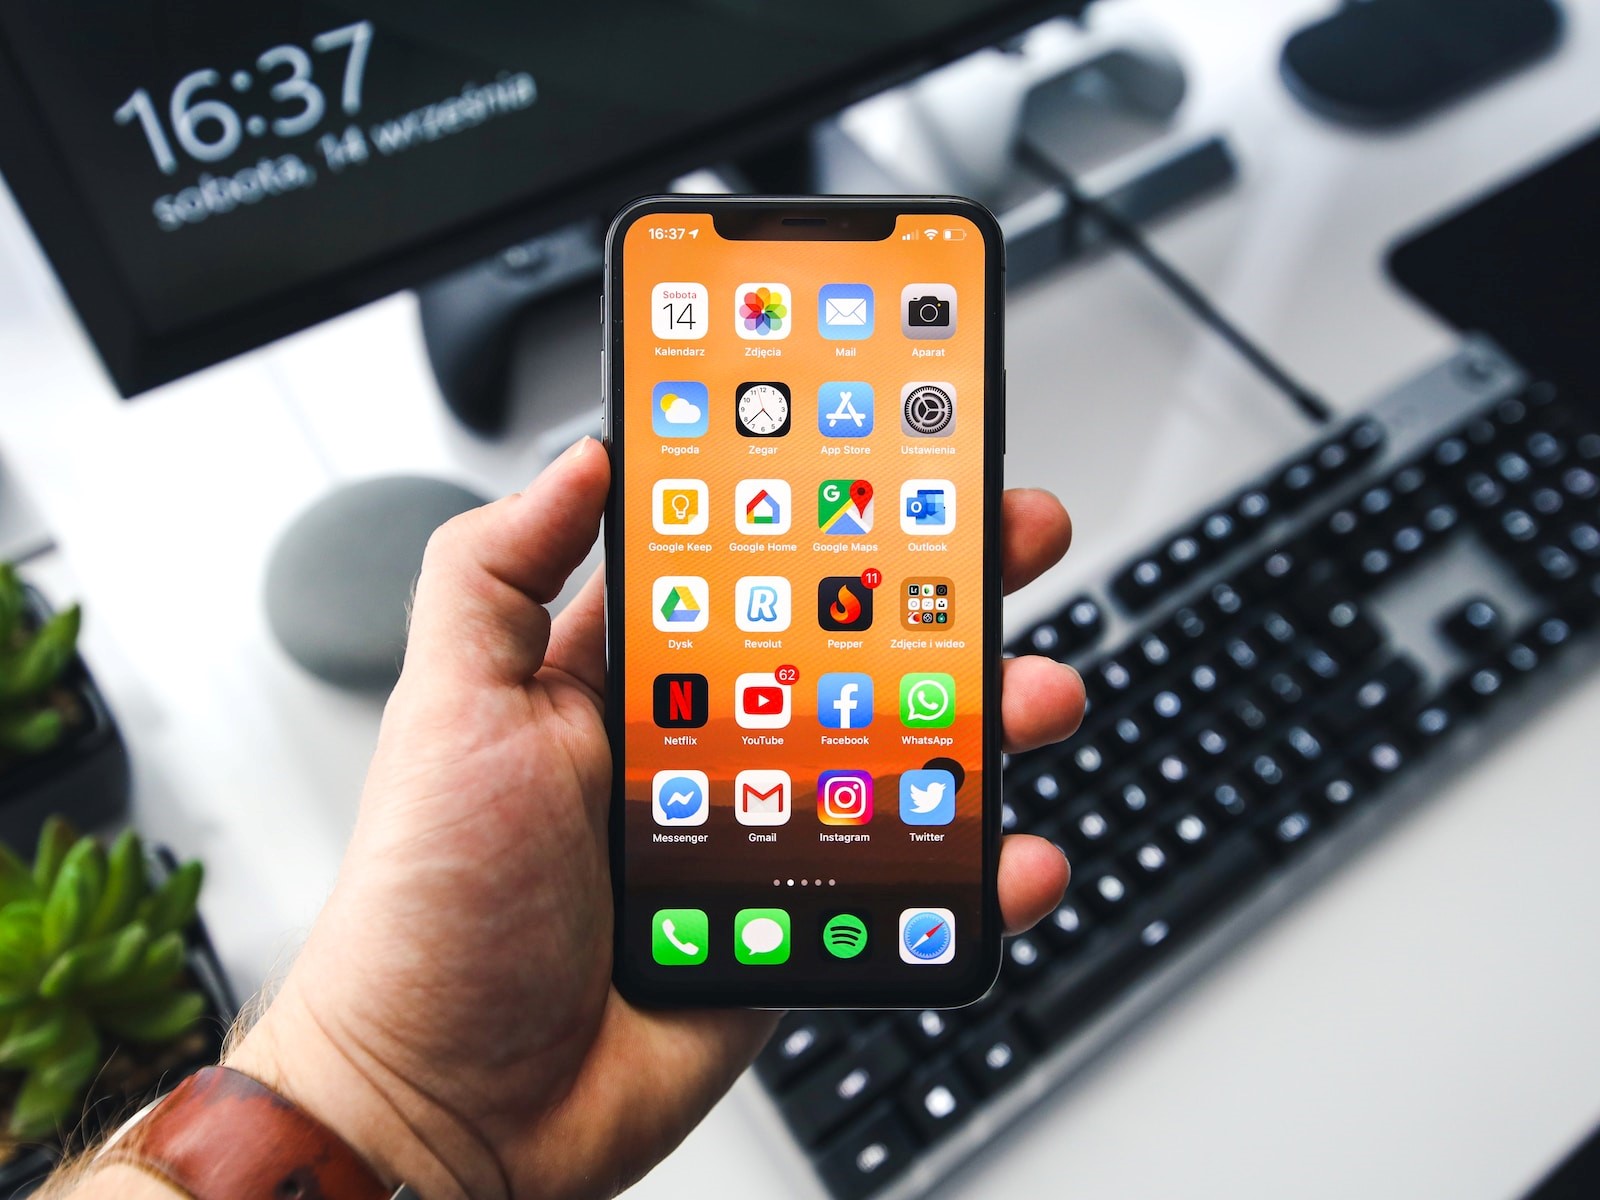 Email Password Change: Step-by-Step Guide For IPhone 11